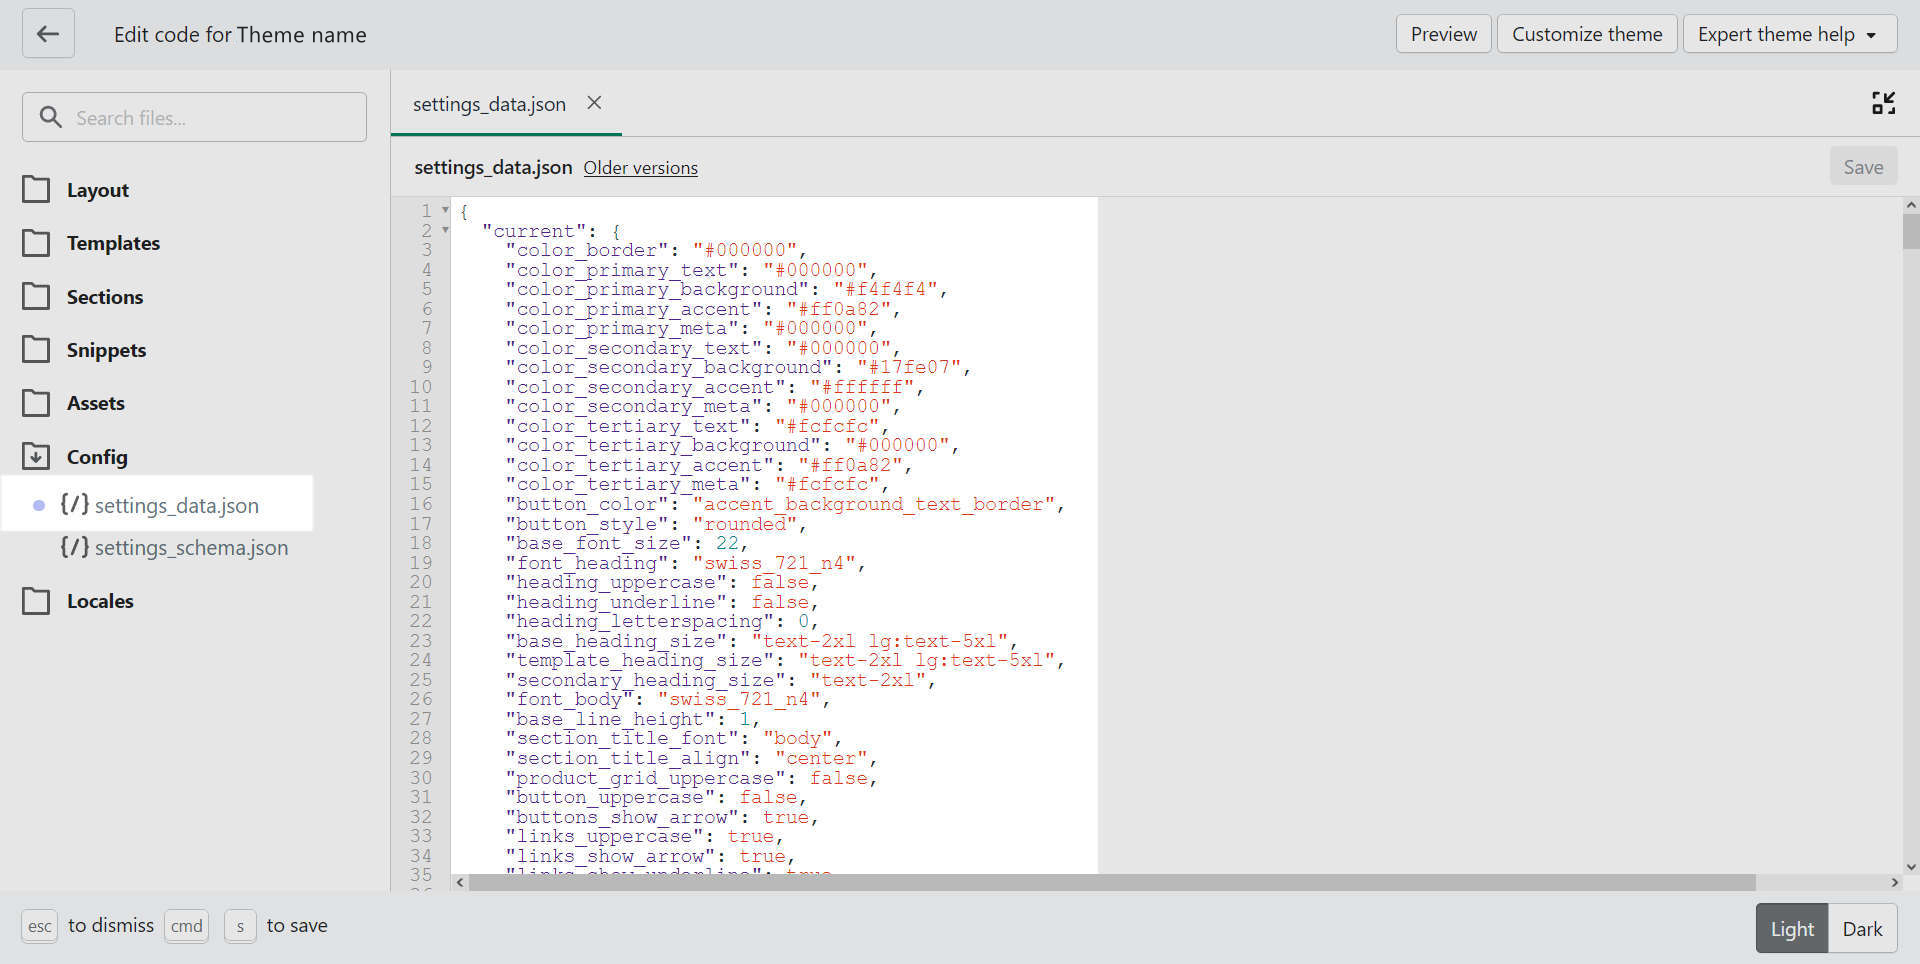 Screenshot of a theme's settings data JSON file open in the Shopify theme code editor